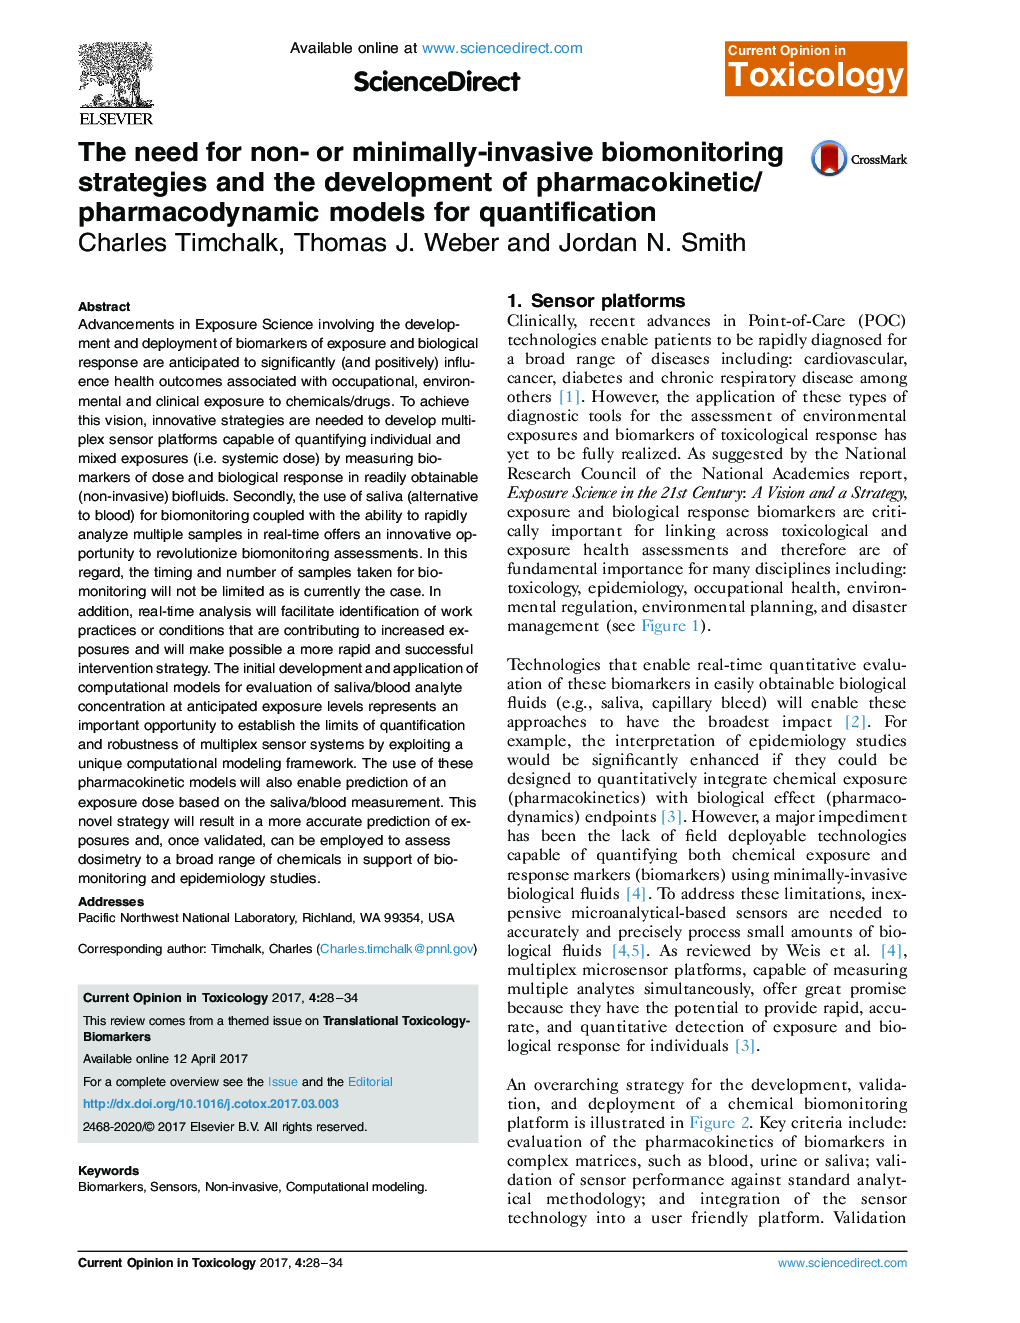 The need for non- or minimally-invasive biomonitoring strategies and the development of pharmacokinetic/pharmacodynamic models for quantification